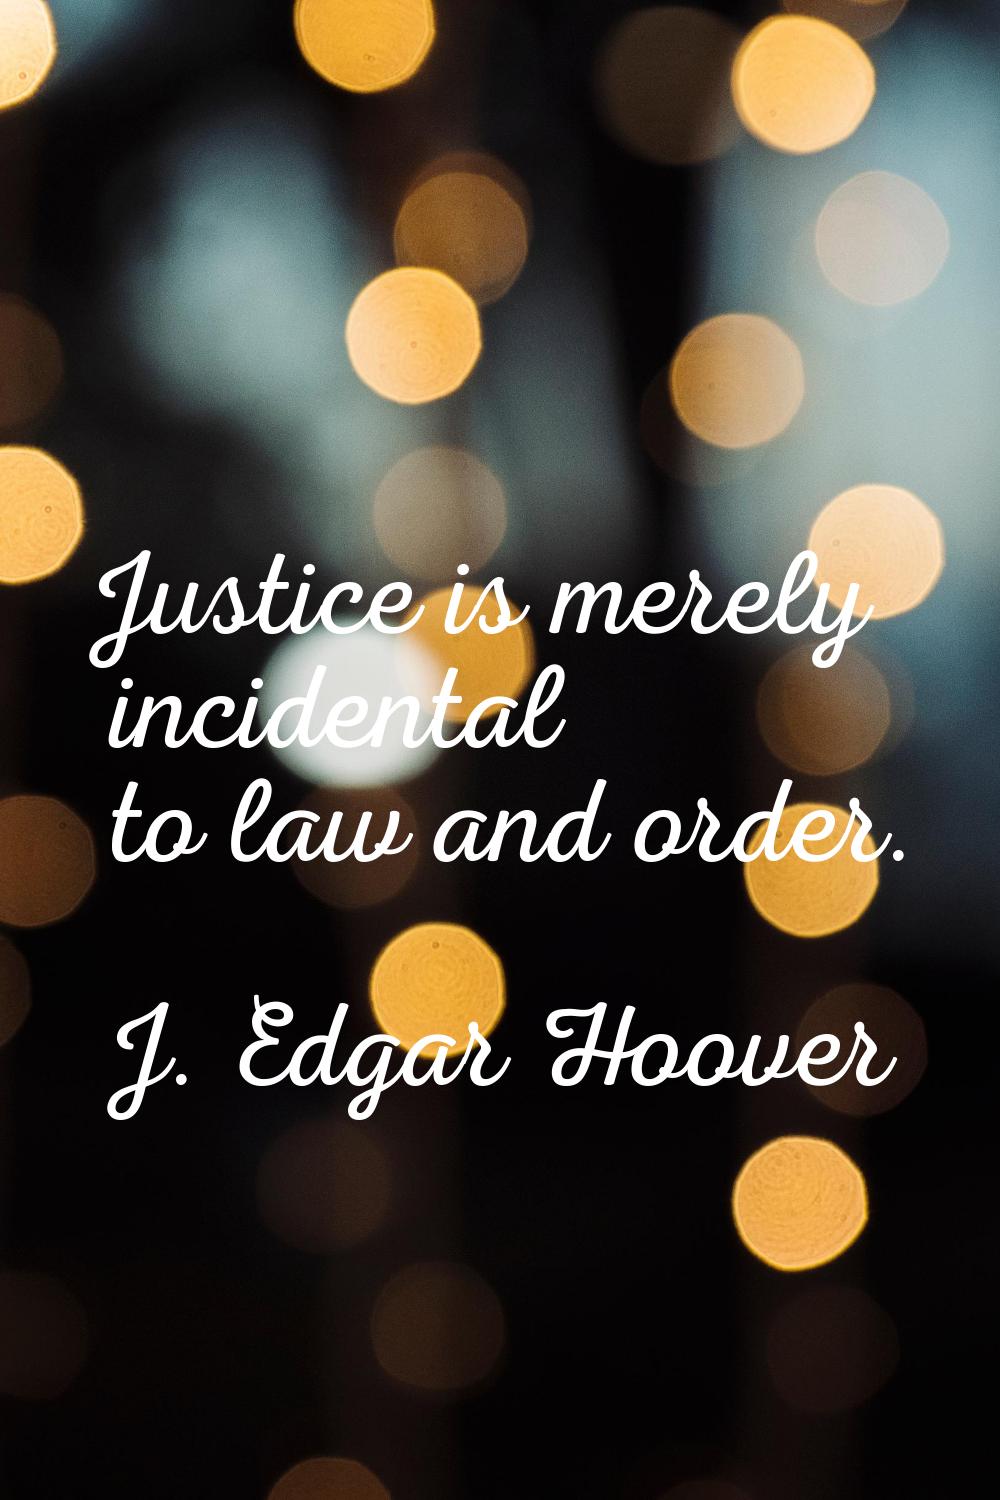 Justice is merely incidental to law and order.